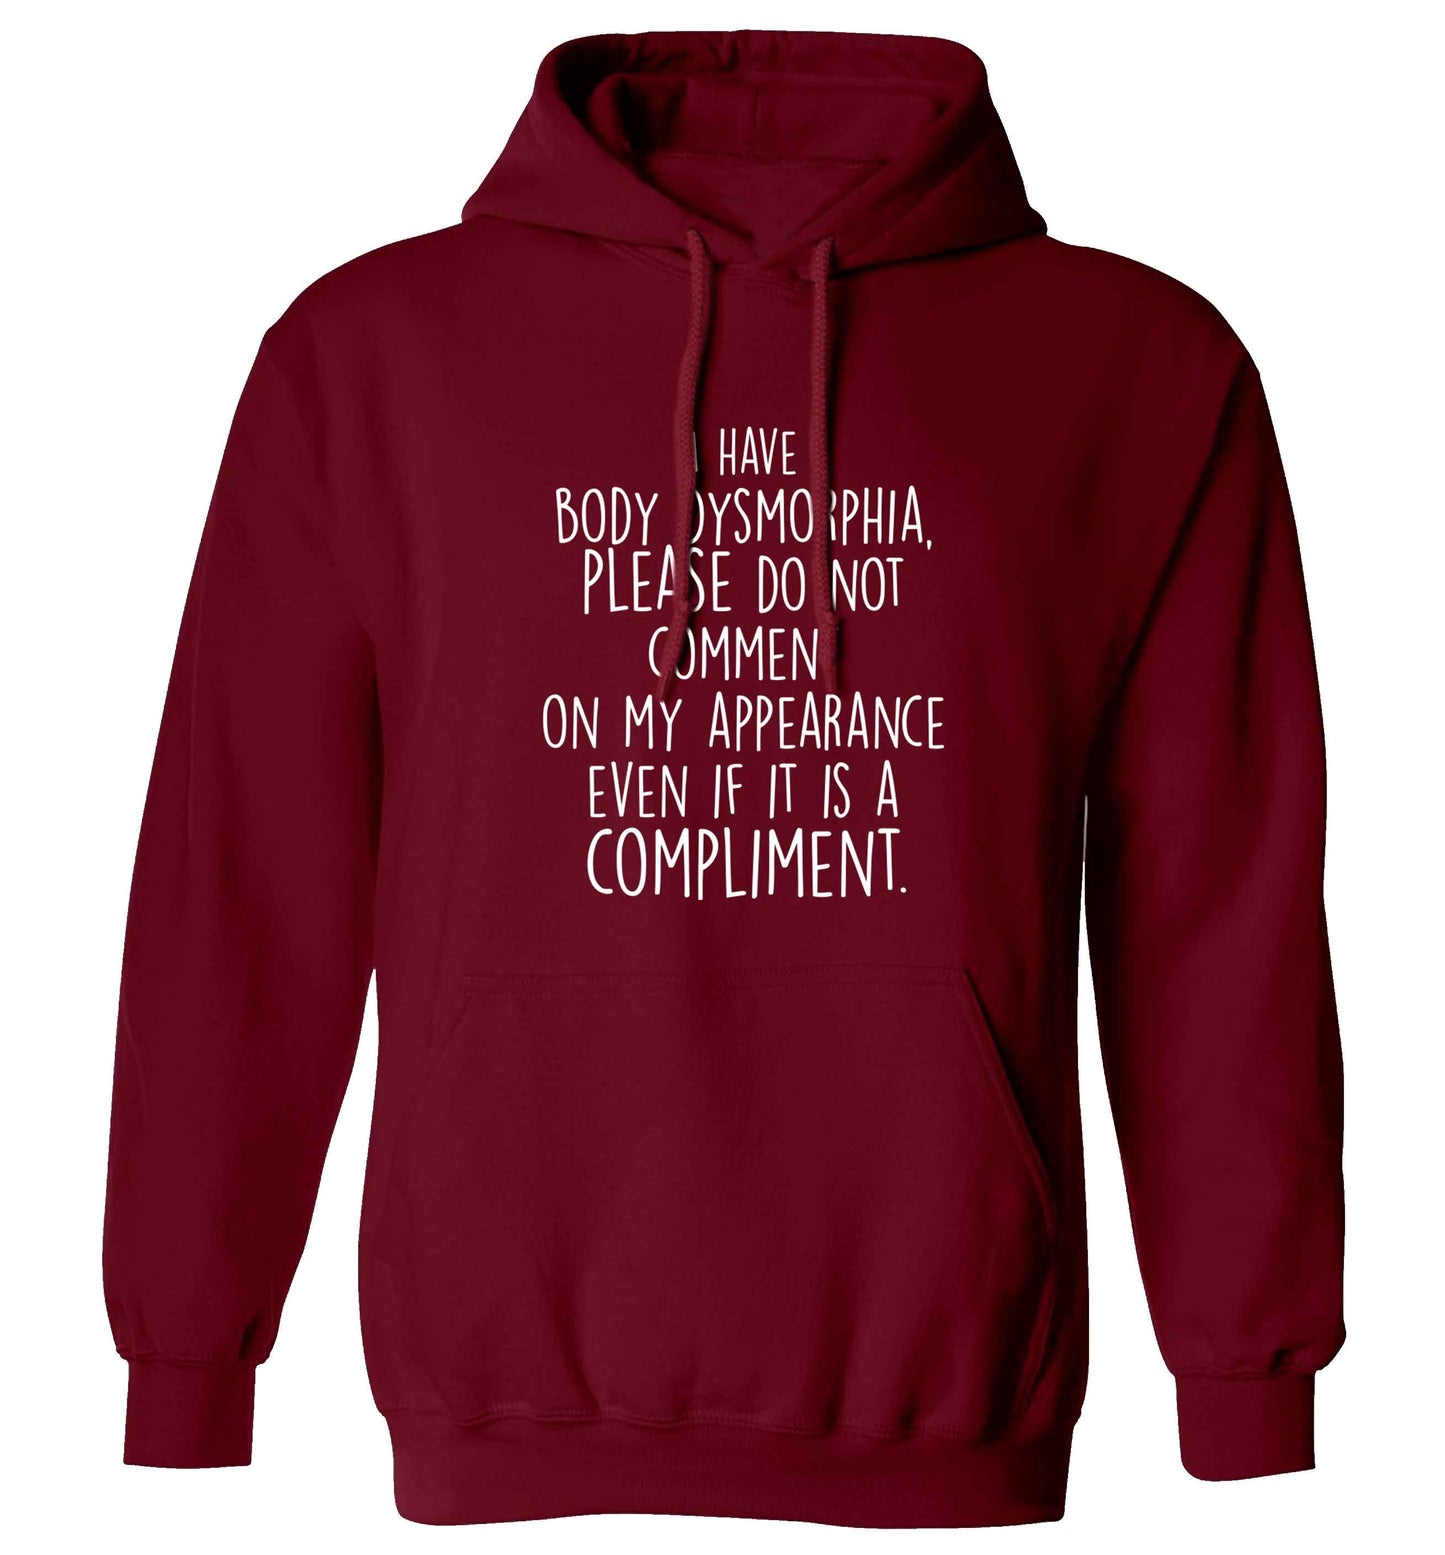 I have body dysmorphia, please do not comment on my appearance even if it is a compliment adults unisex maroon hoodie 2XL